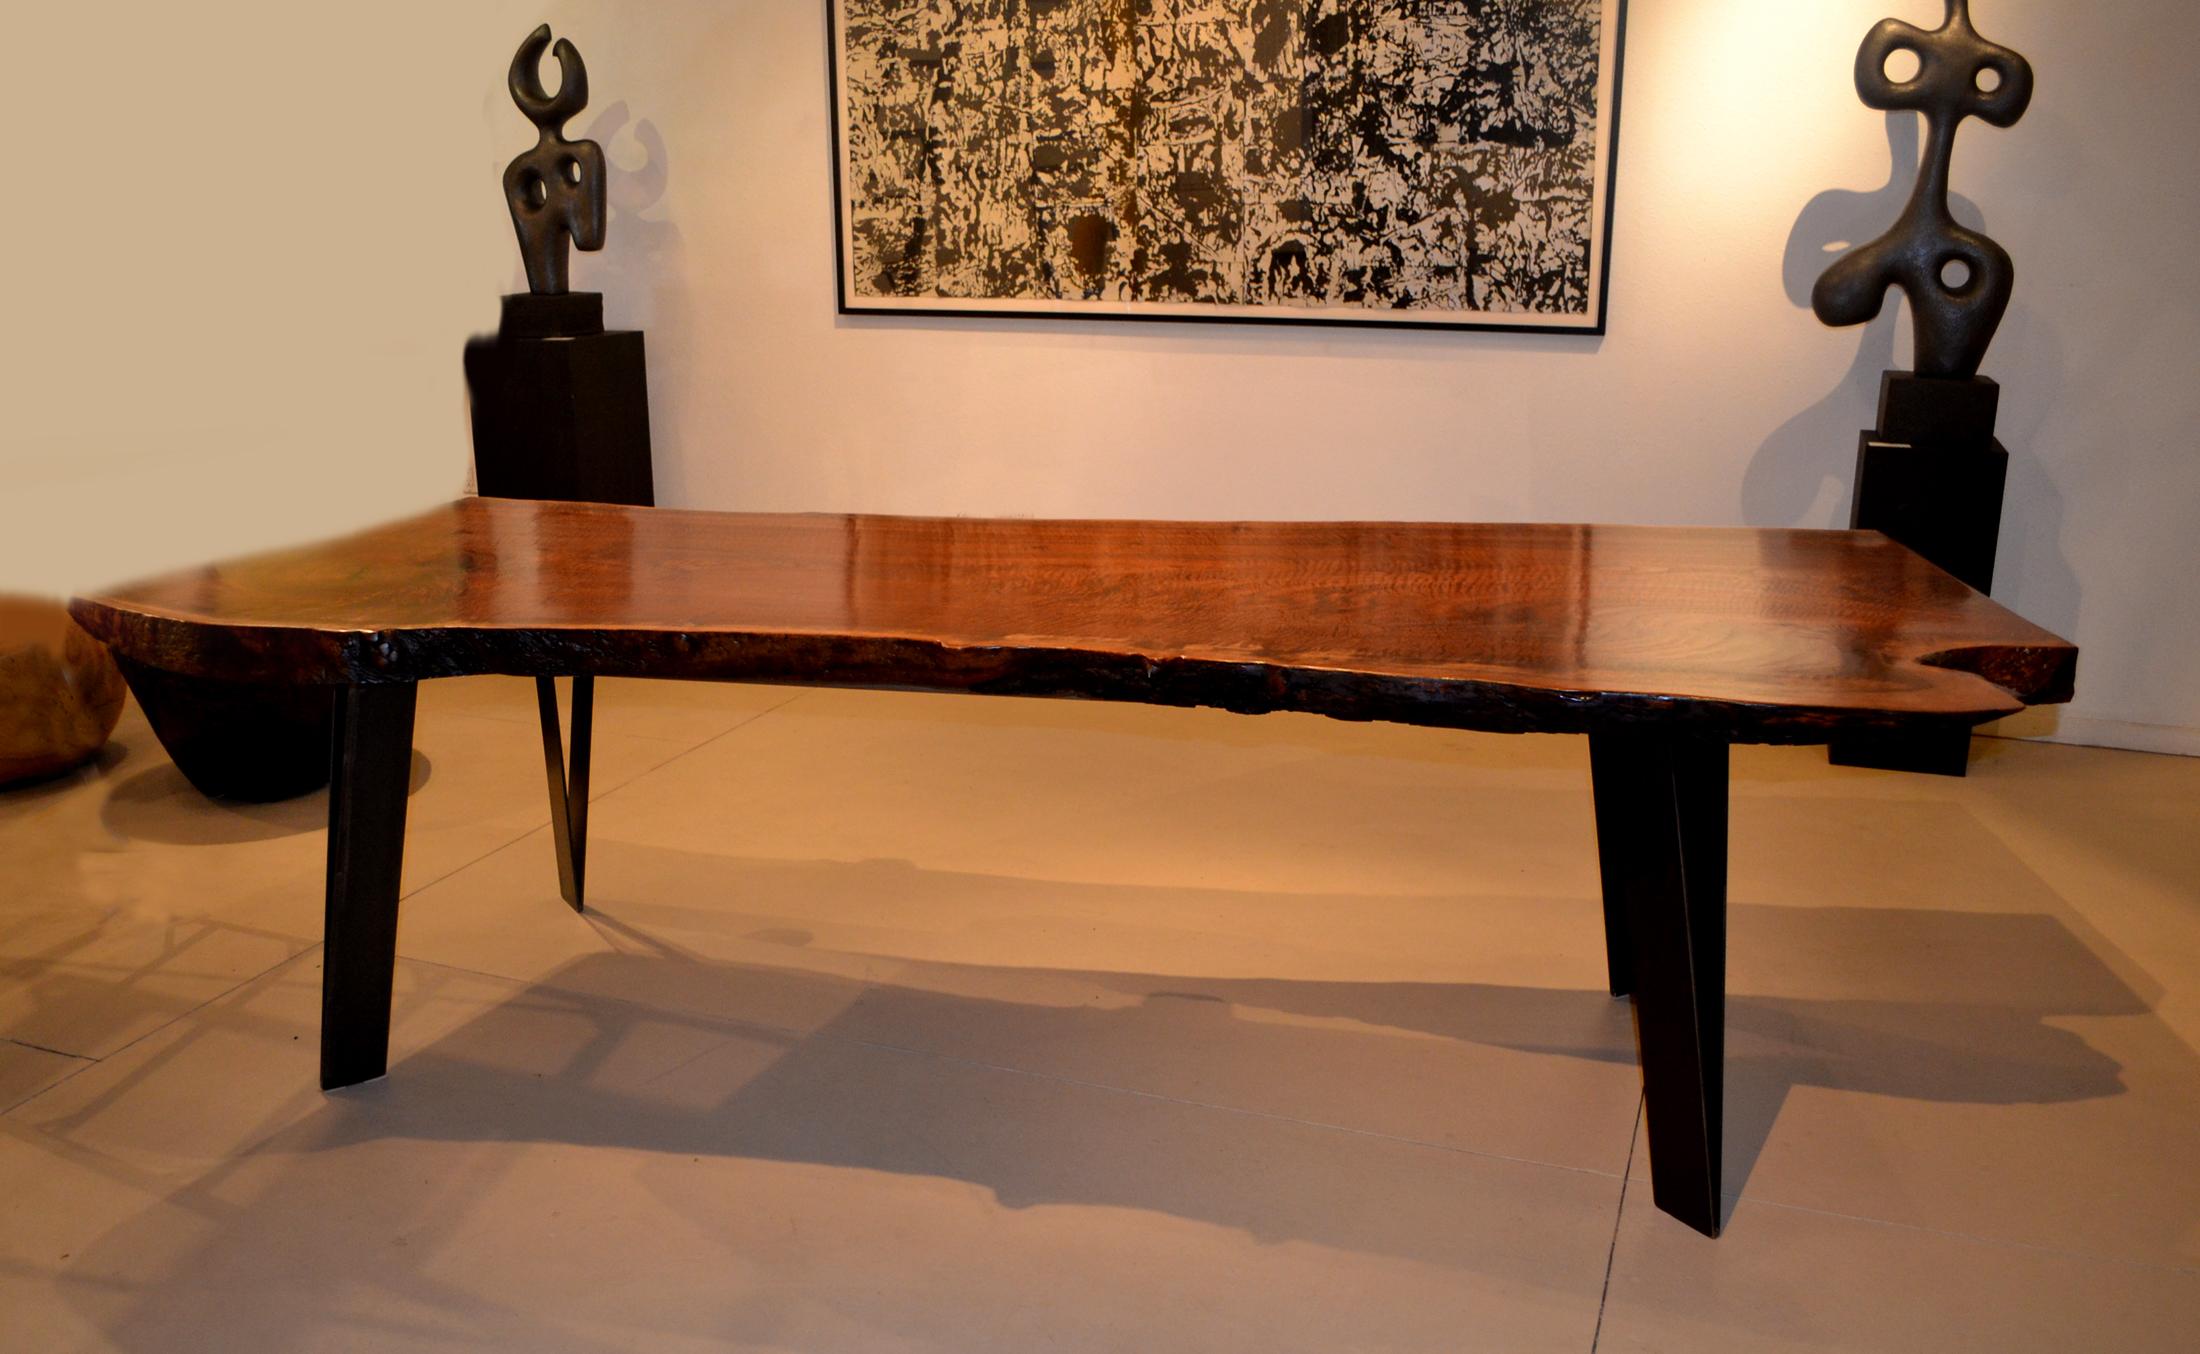 20th Century Claro Walnut Slab Dining Table with Steel Legs by Artist Charles Green For Sale